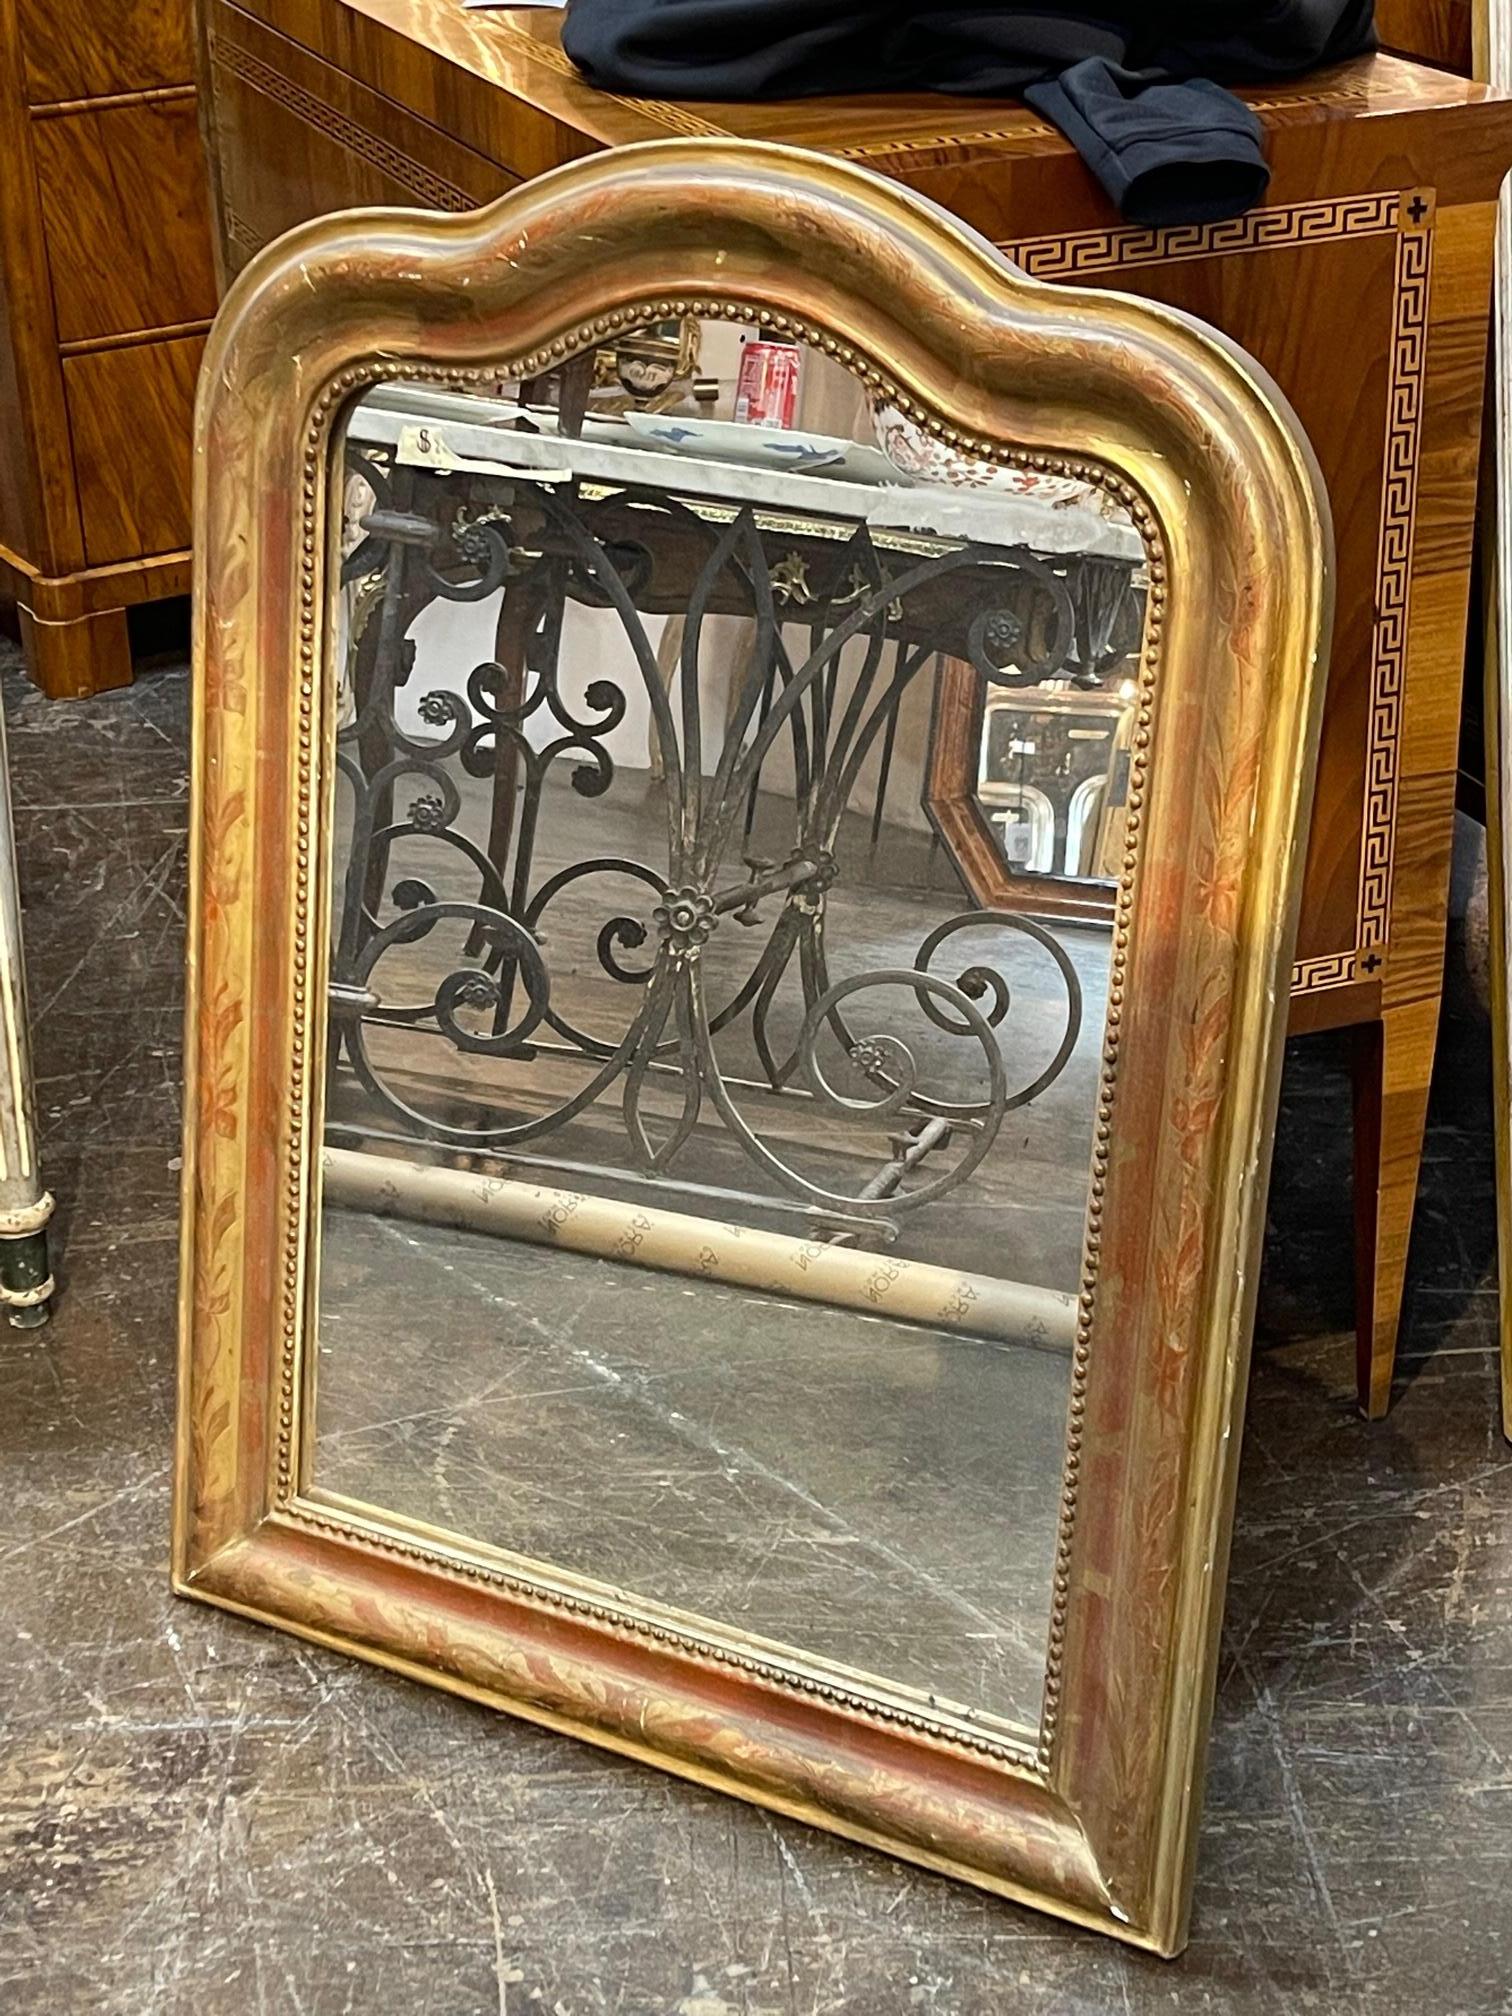 Lovely 19th century French gold leaf Louis Philippe mirror with arched top. This mirror also has a beautiful floral pattern and a beaded inner border. The patina has a touch of red to it. Gorgeous!